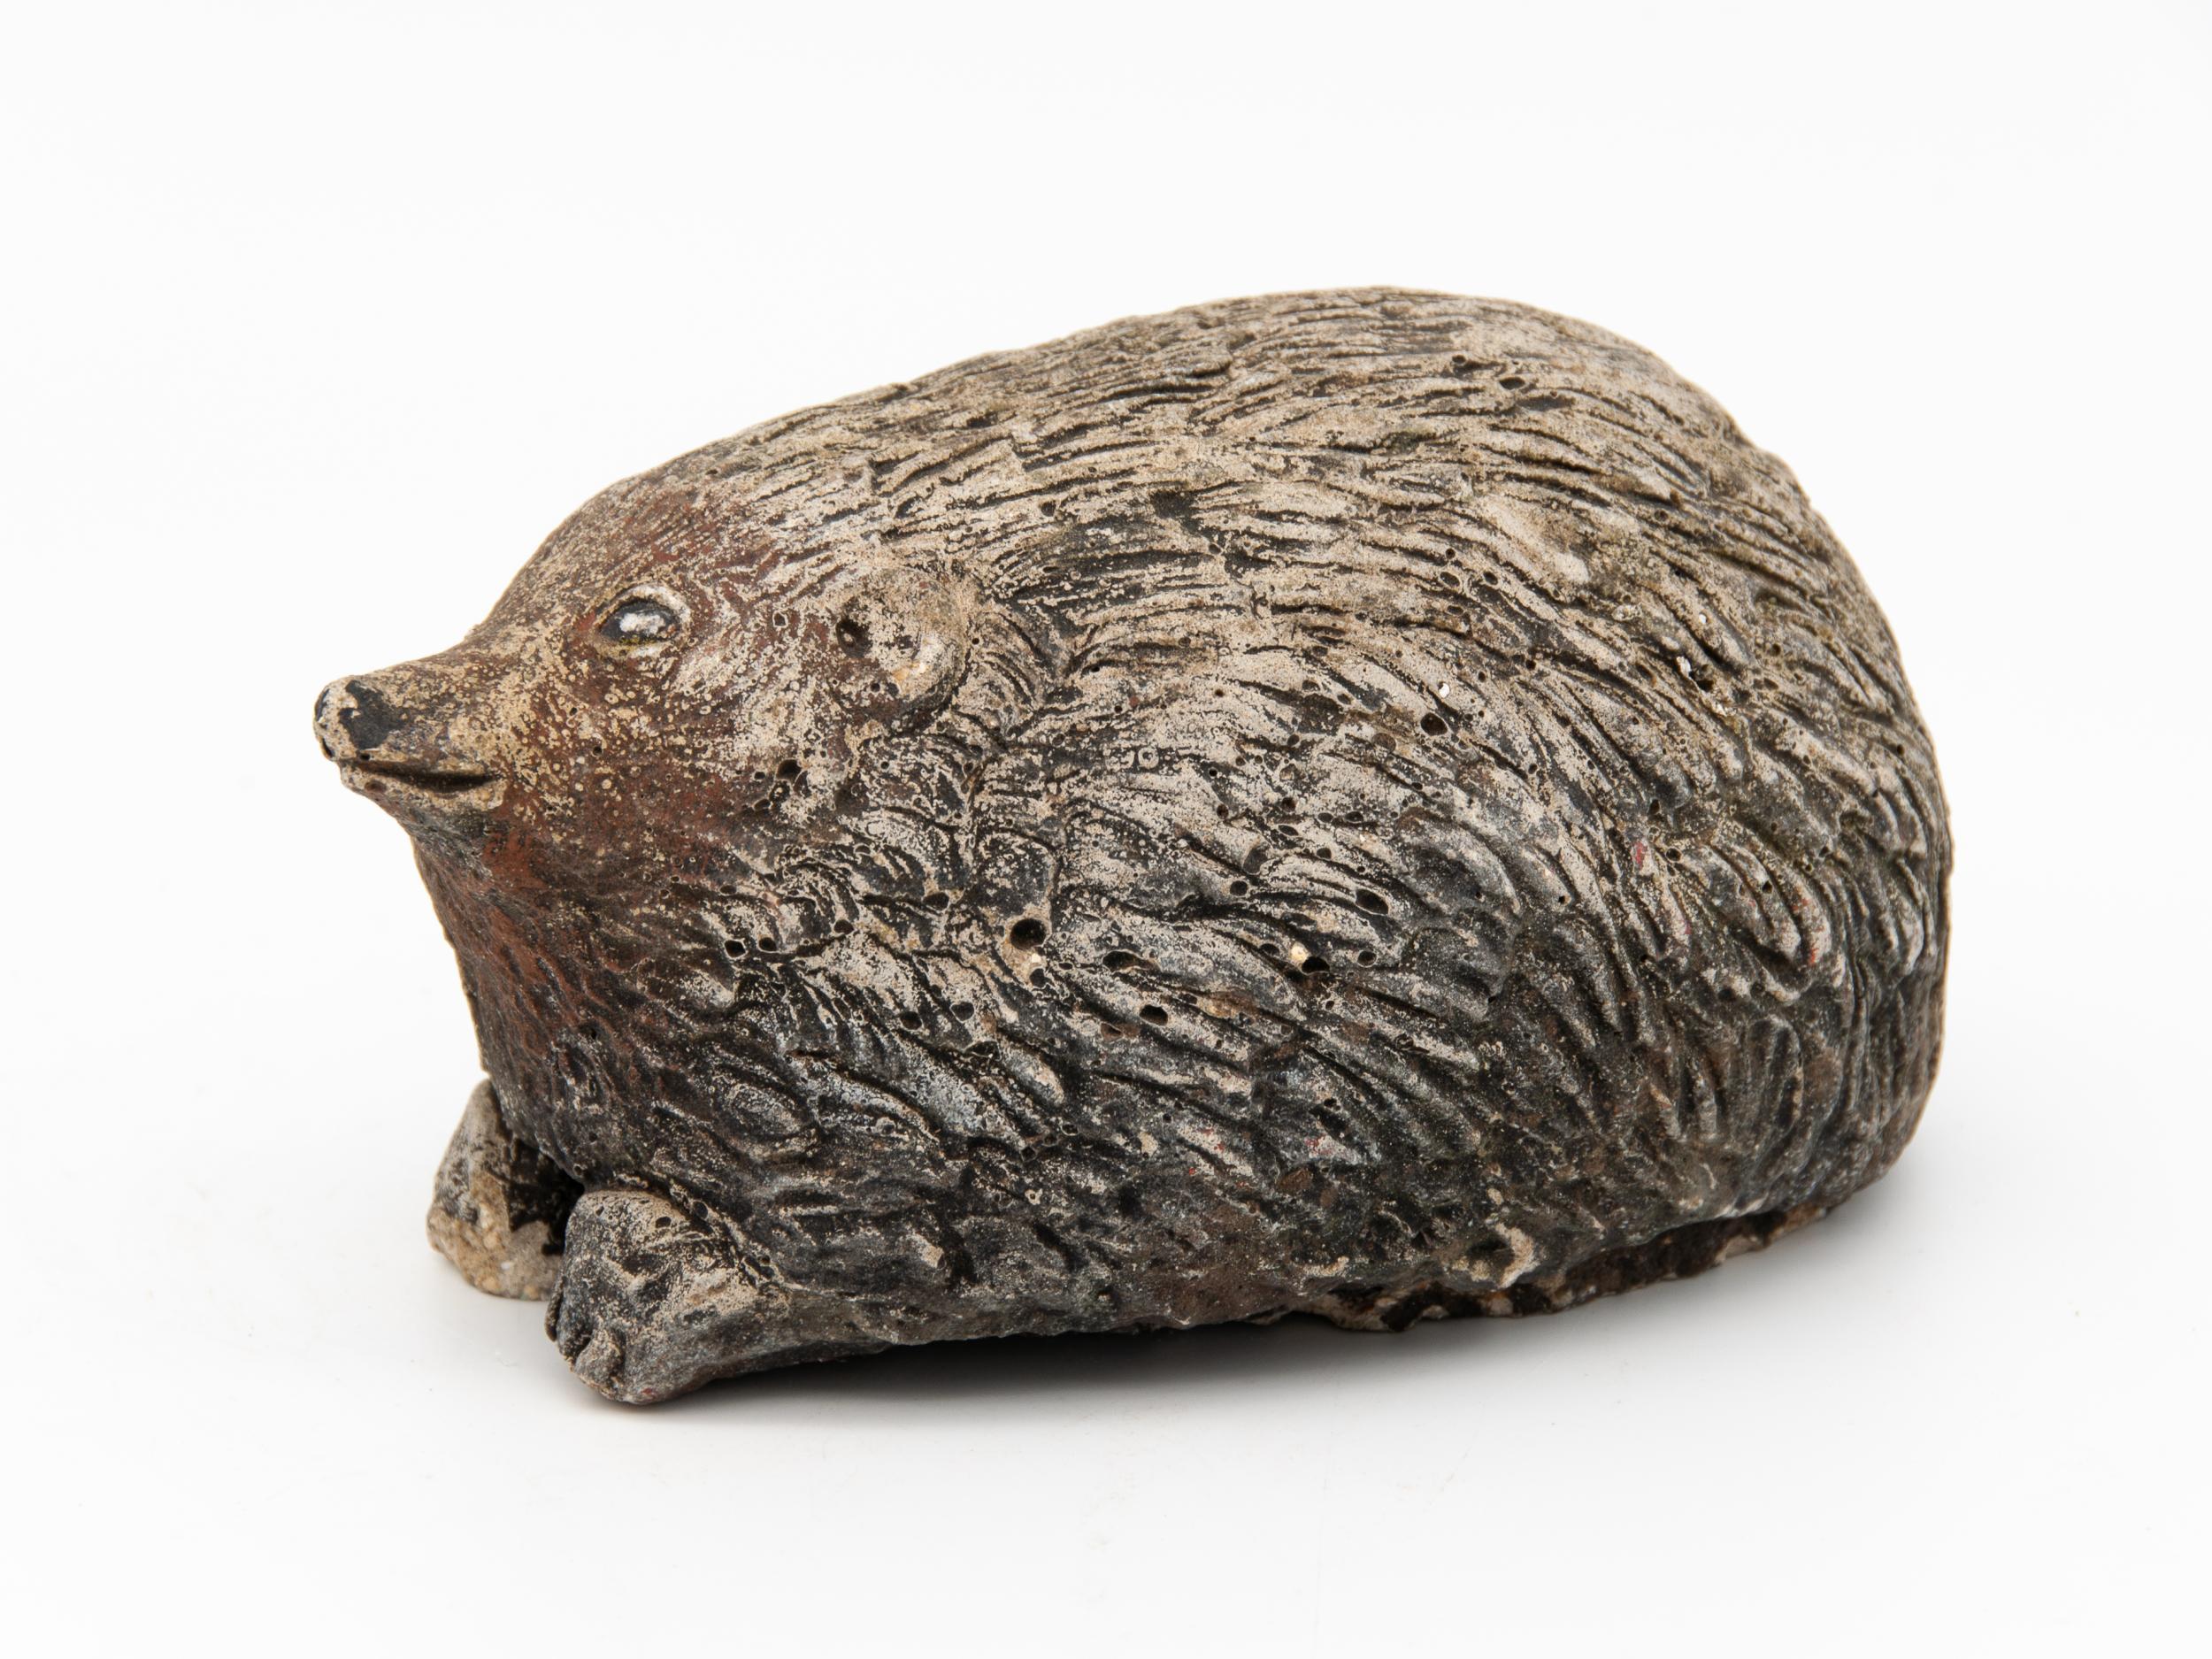 A mid 20th century English cast stone garden ornament in the shape of a hedgehog. An unusual style of hedgehog garden ornament. Wear consistent with age and use.